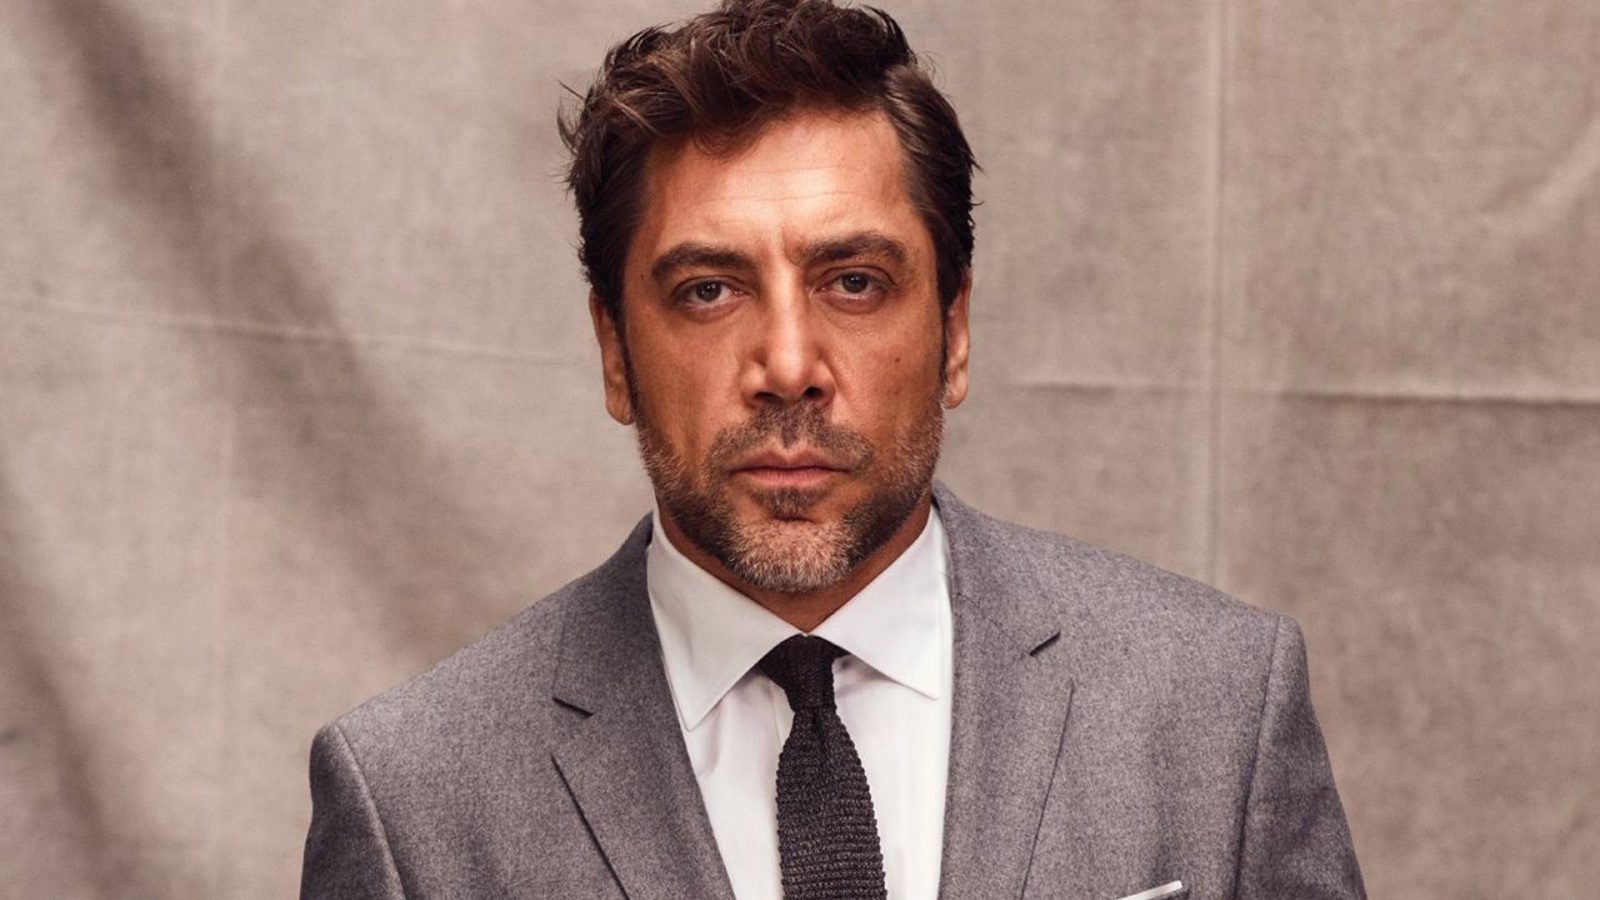 Can You Match These Actors With Their Starring Roles? Javier Bardem